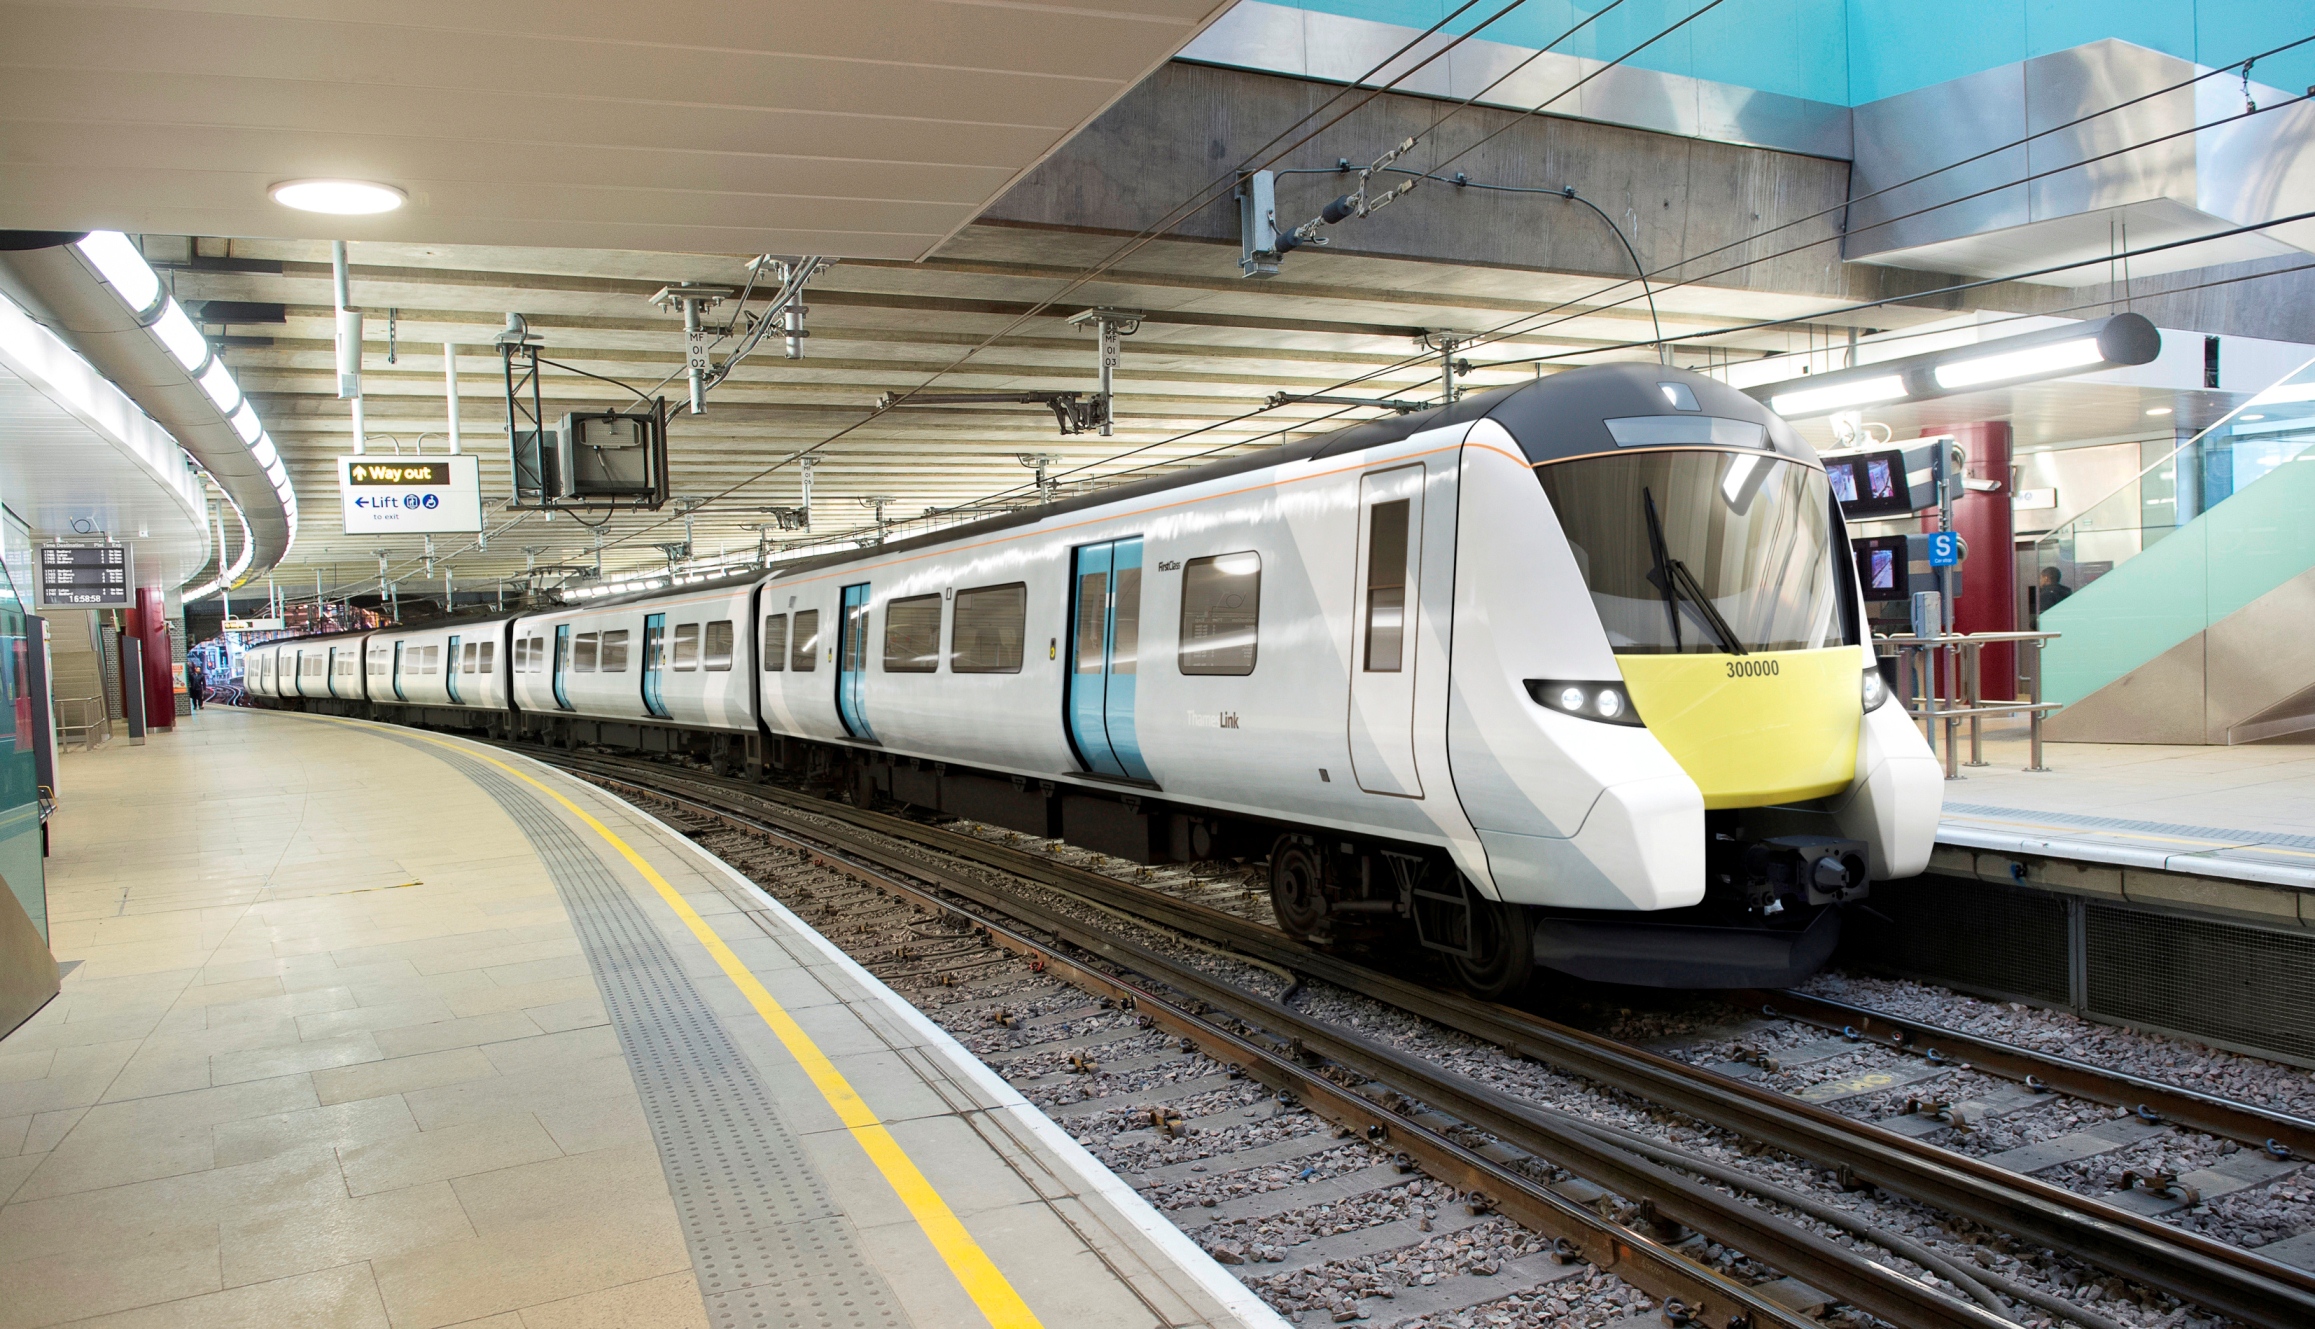 Siemens $1.6 Billion Contract To Deliver 1,140 New Carriages To The British Rail Network